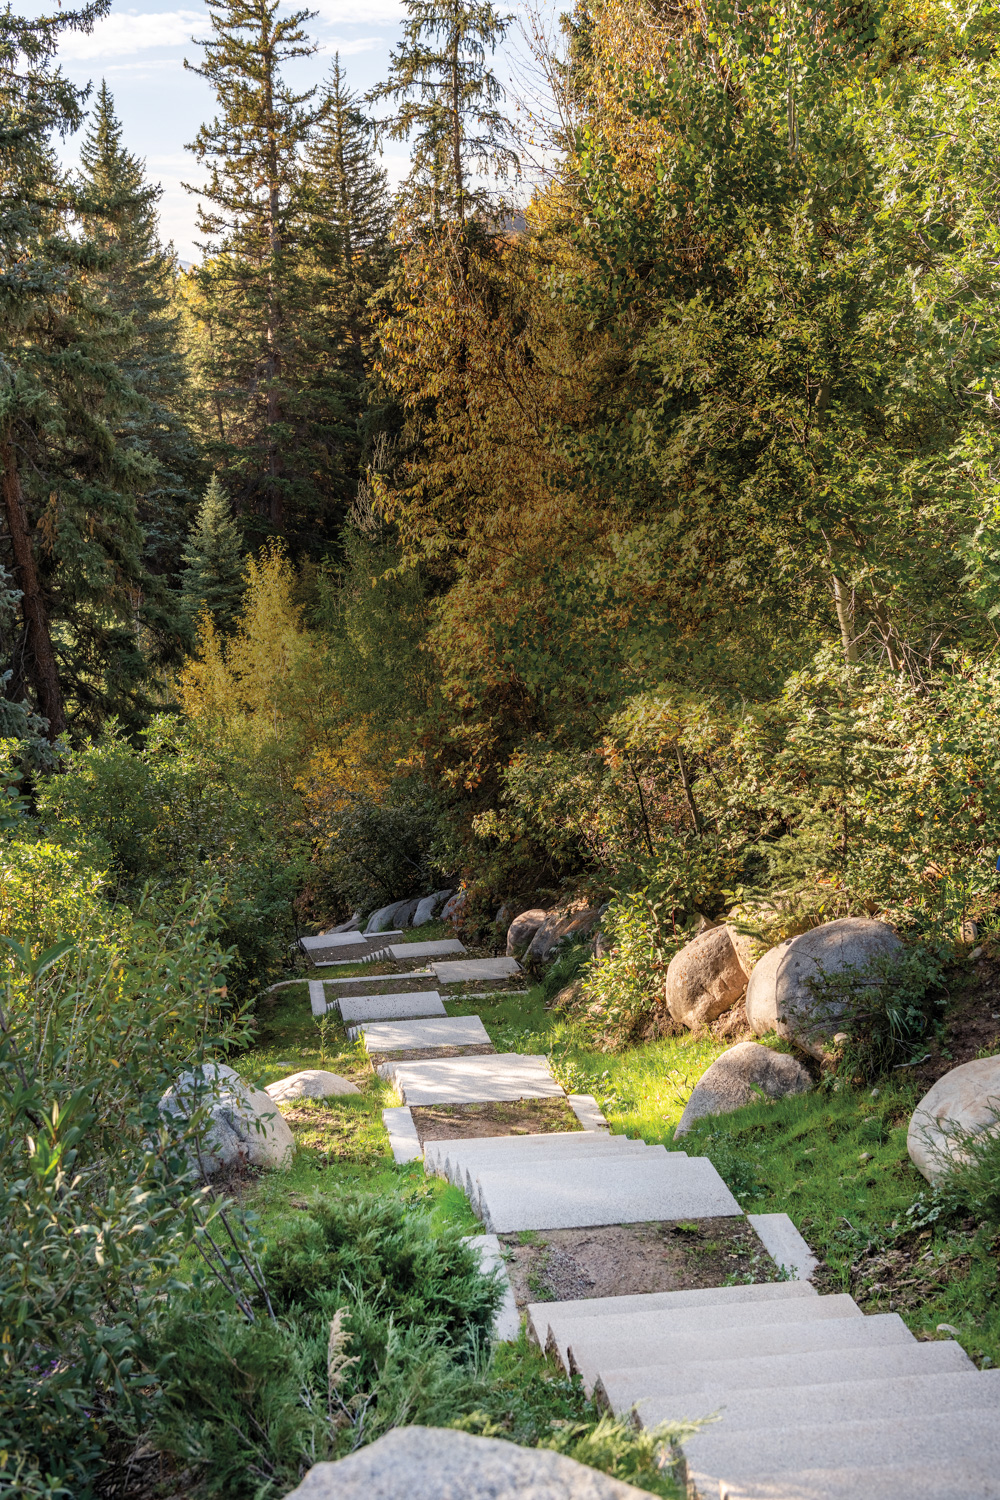 Limestone steps going down a creek surrounded by boulders and greenery